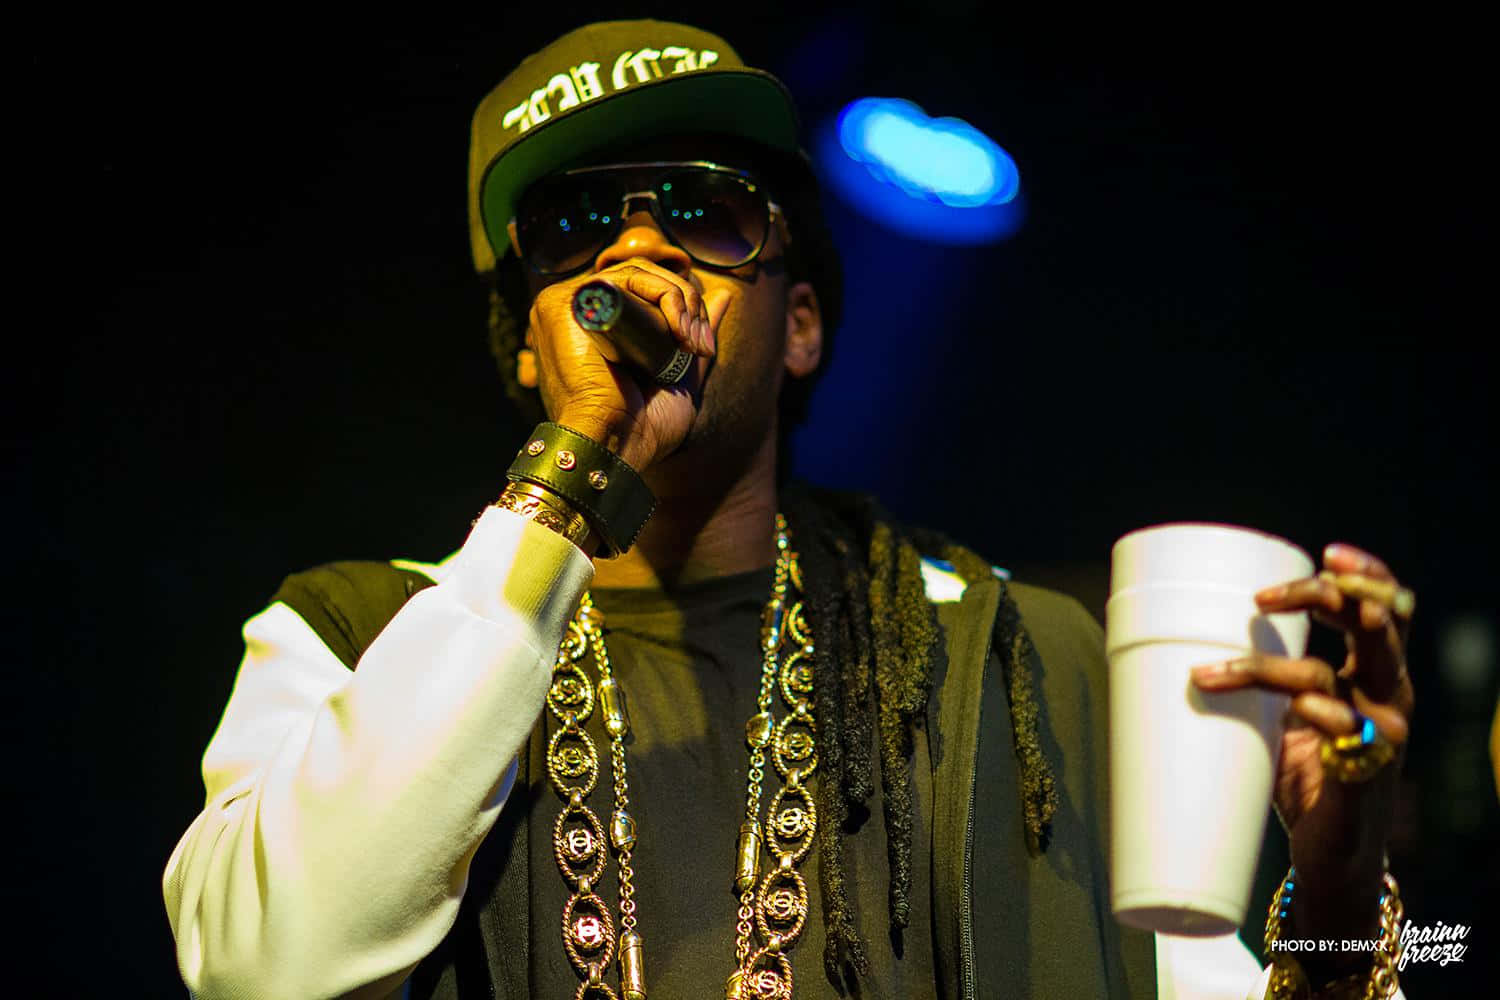 2 Chainz looks at the camera amidst his success in the music industry